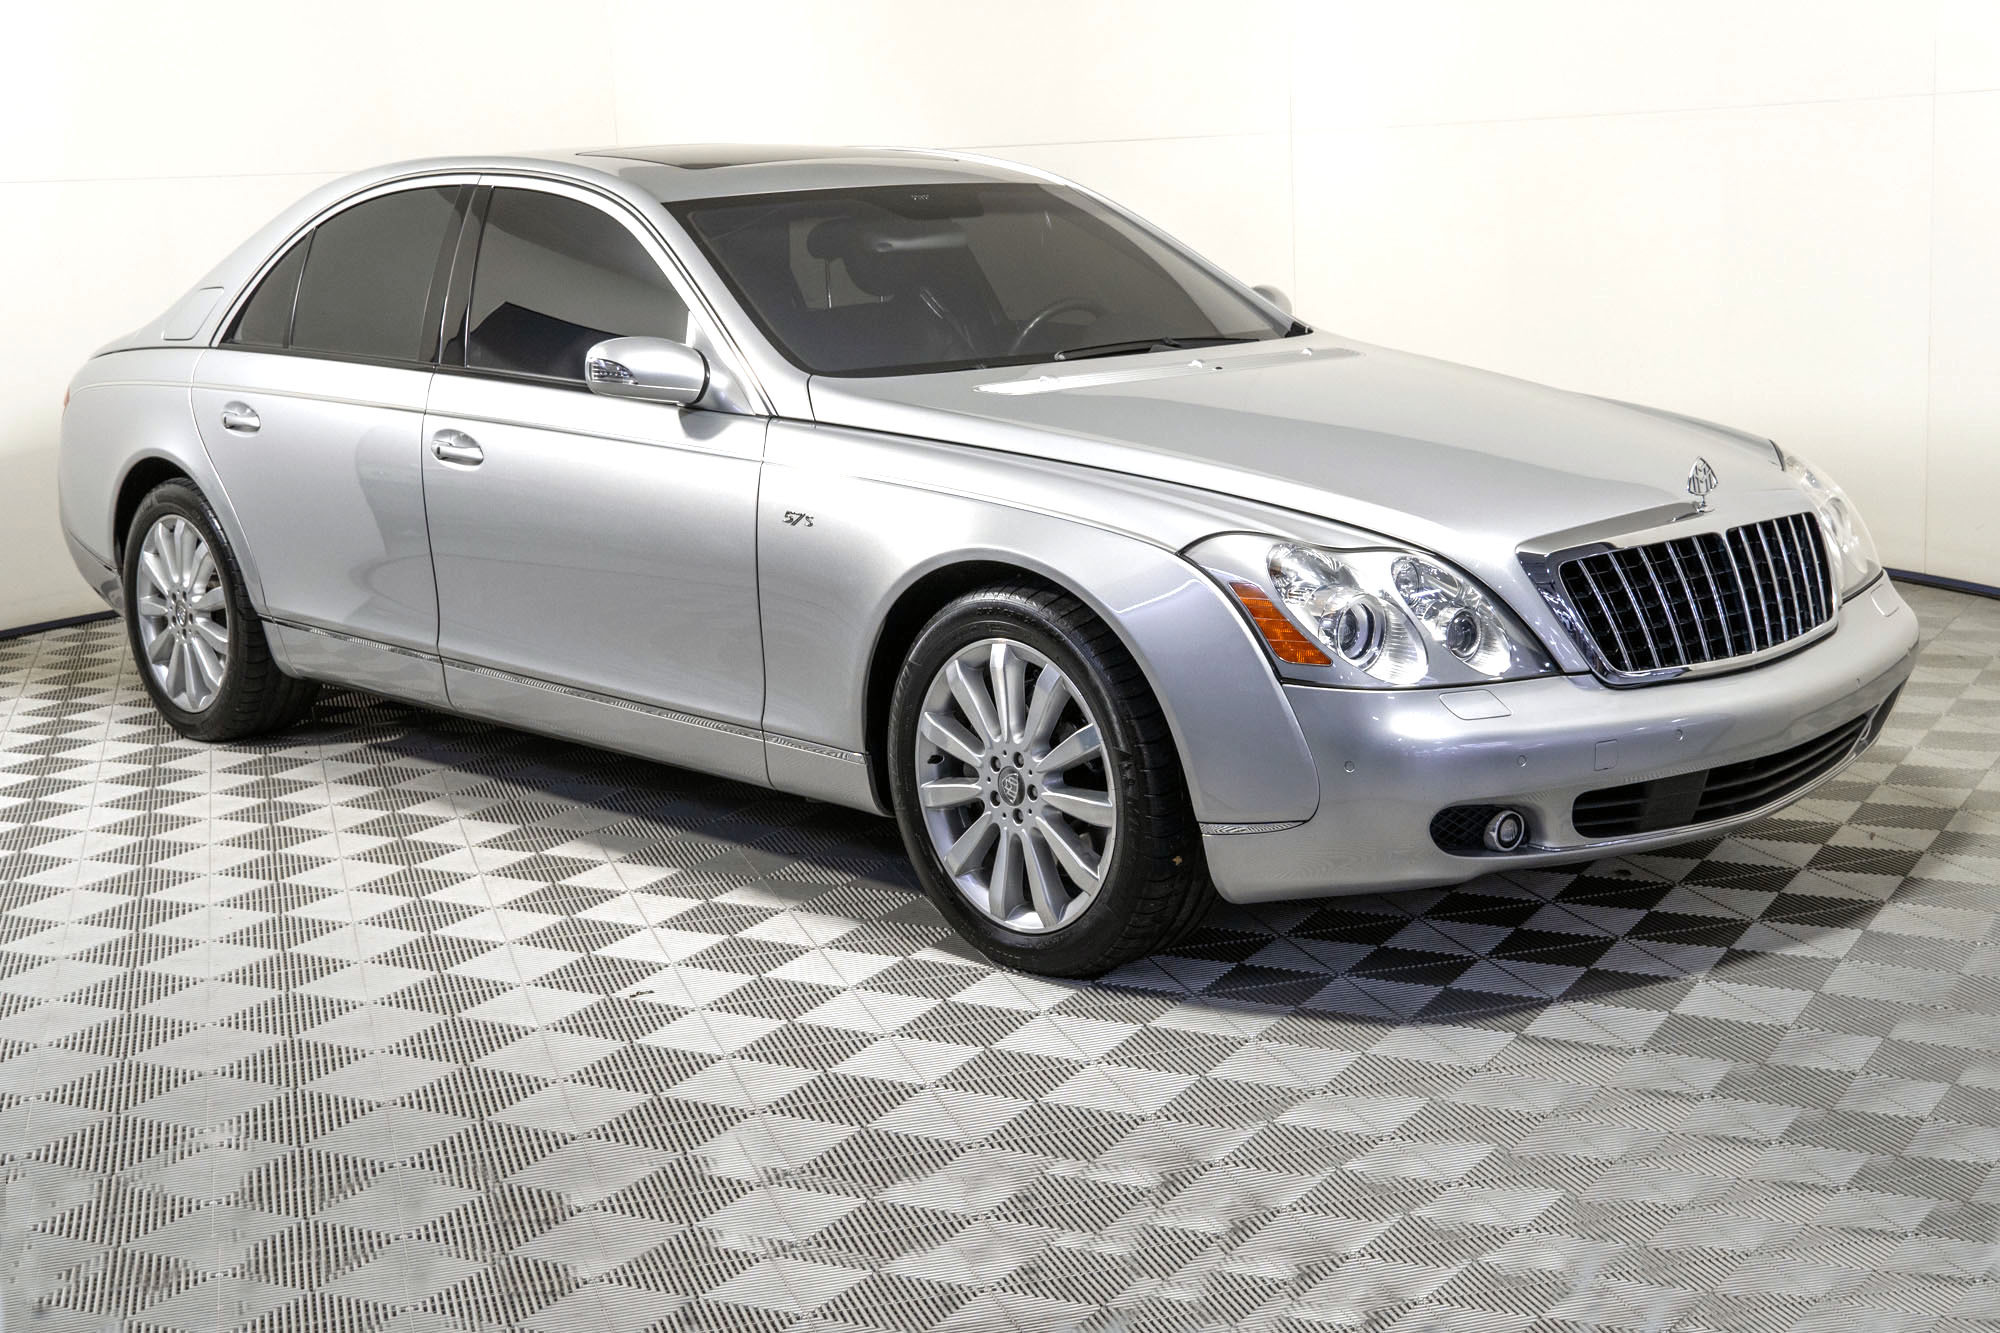 Barrett-Jackson Scottsdale Auction Preview: 2008 Maybach 57S, once owned by  Kevin Durant